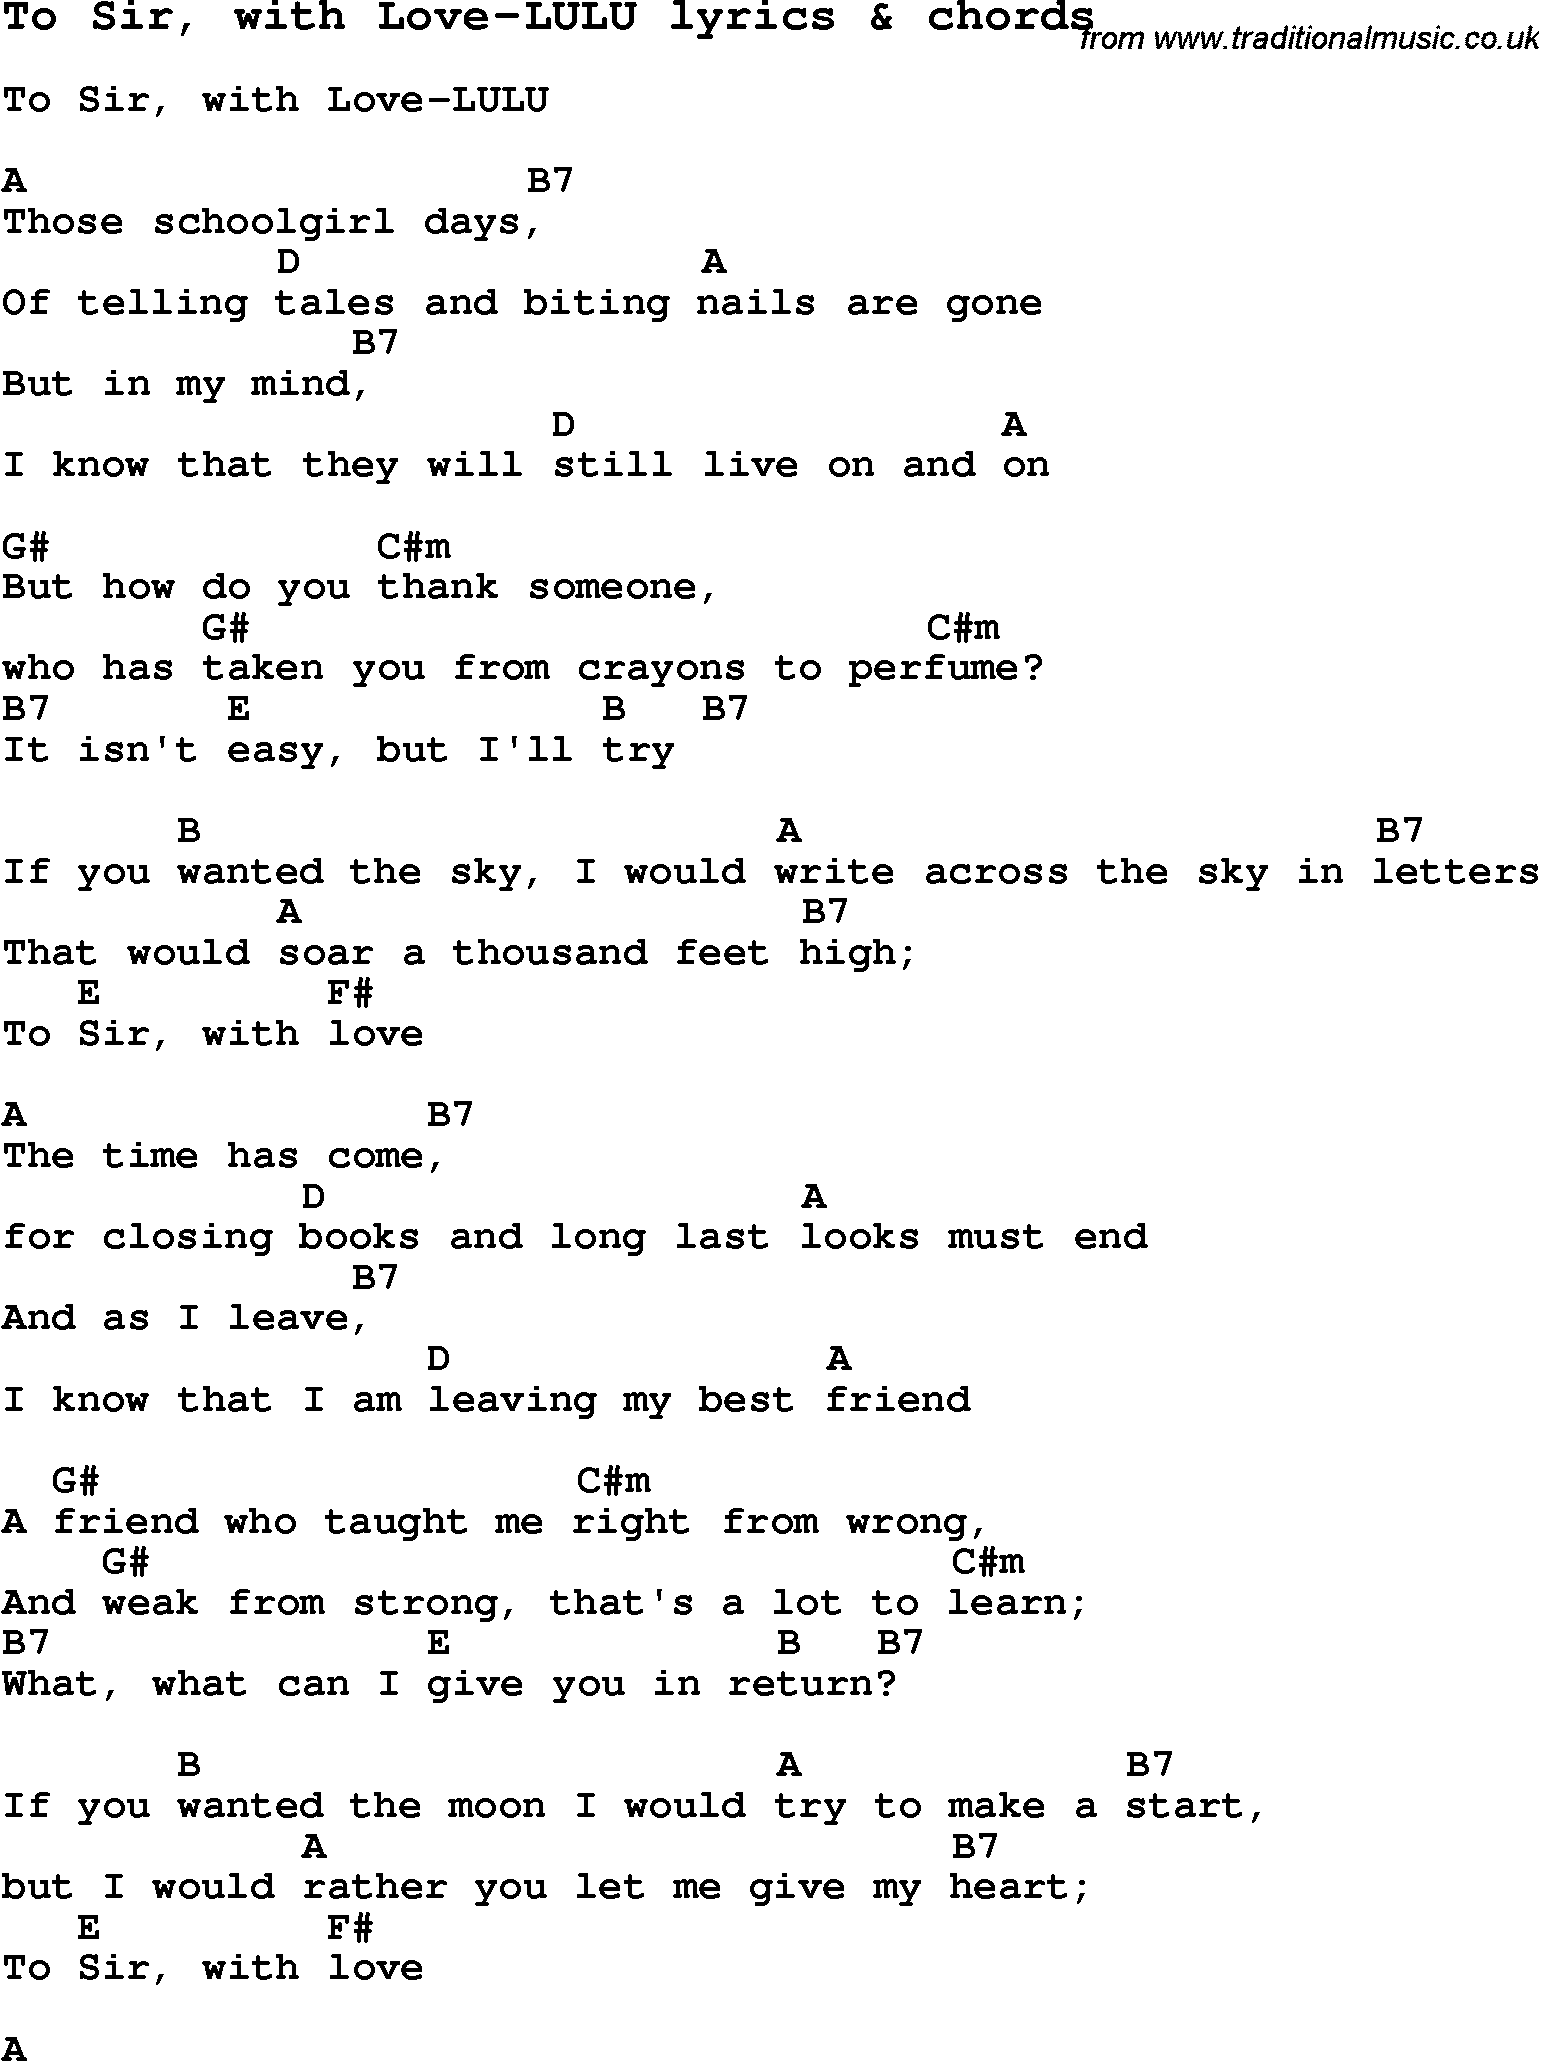 Love Song Lyrics for: To Sir, with Love-LULU with chords for Ukulele, Guitar Banjo etc.